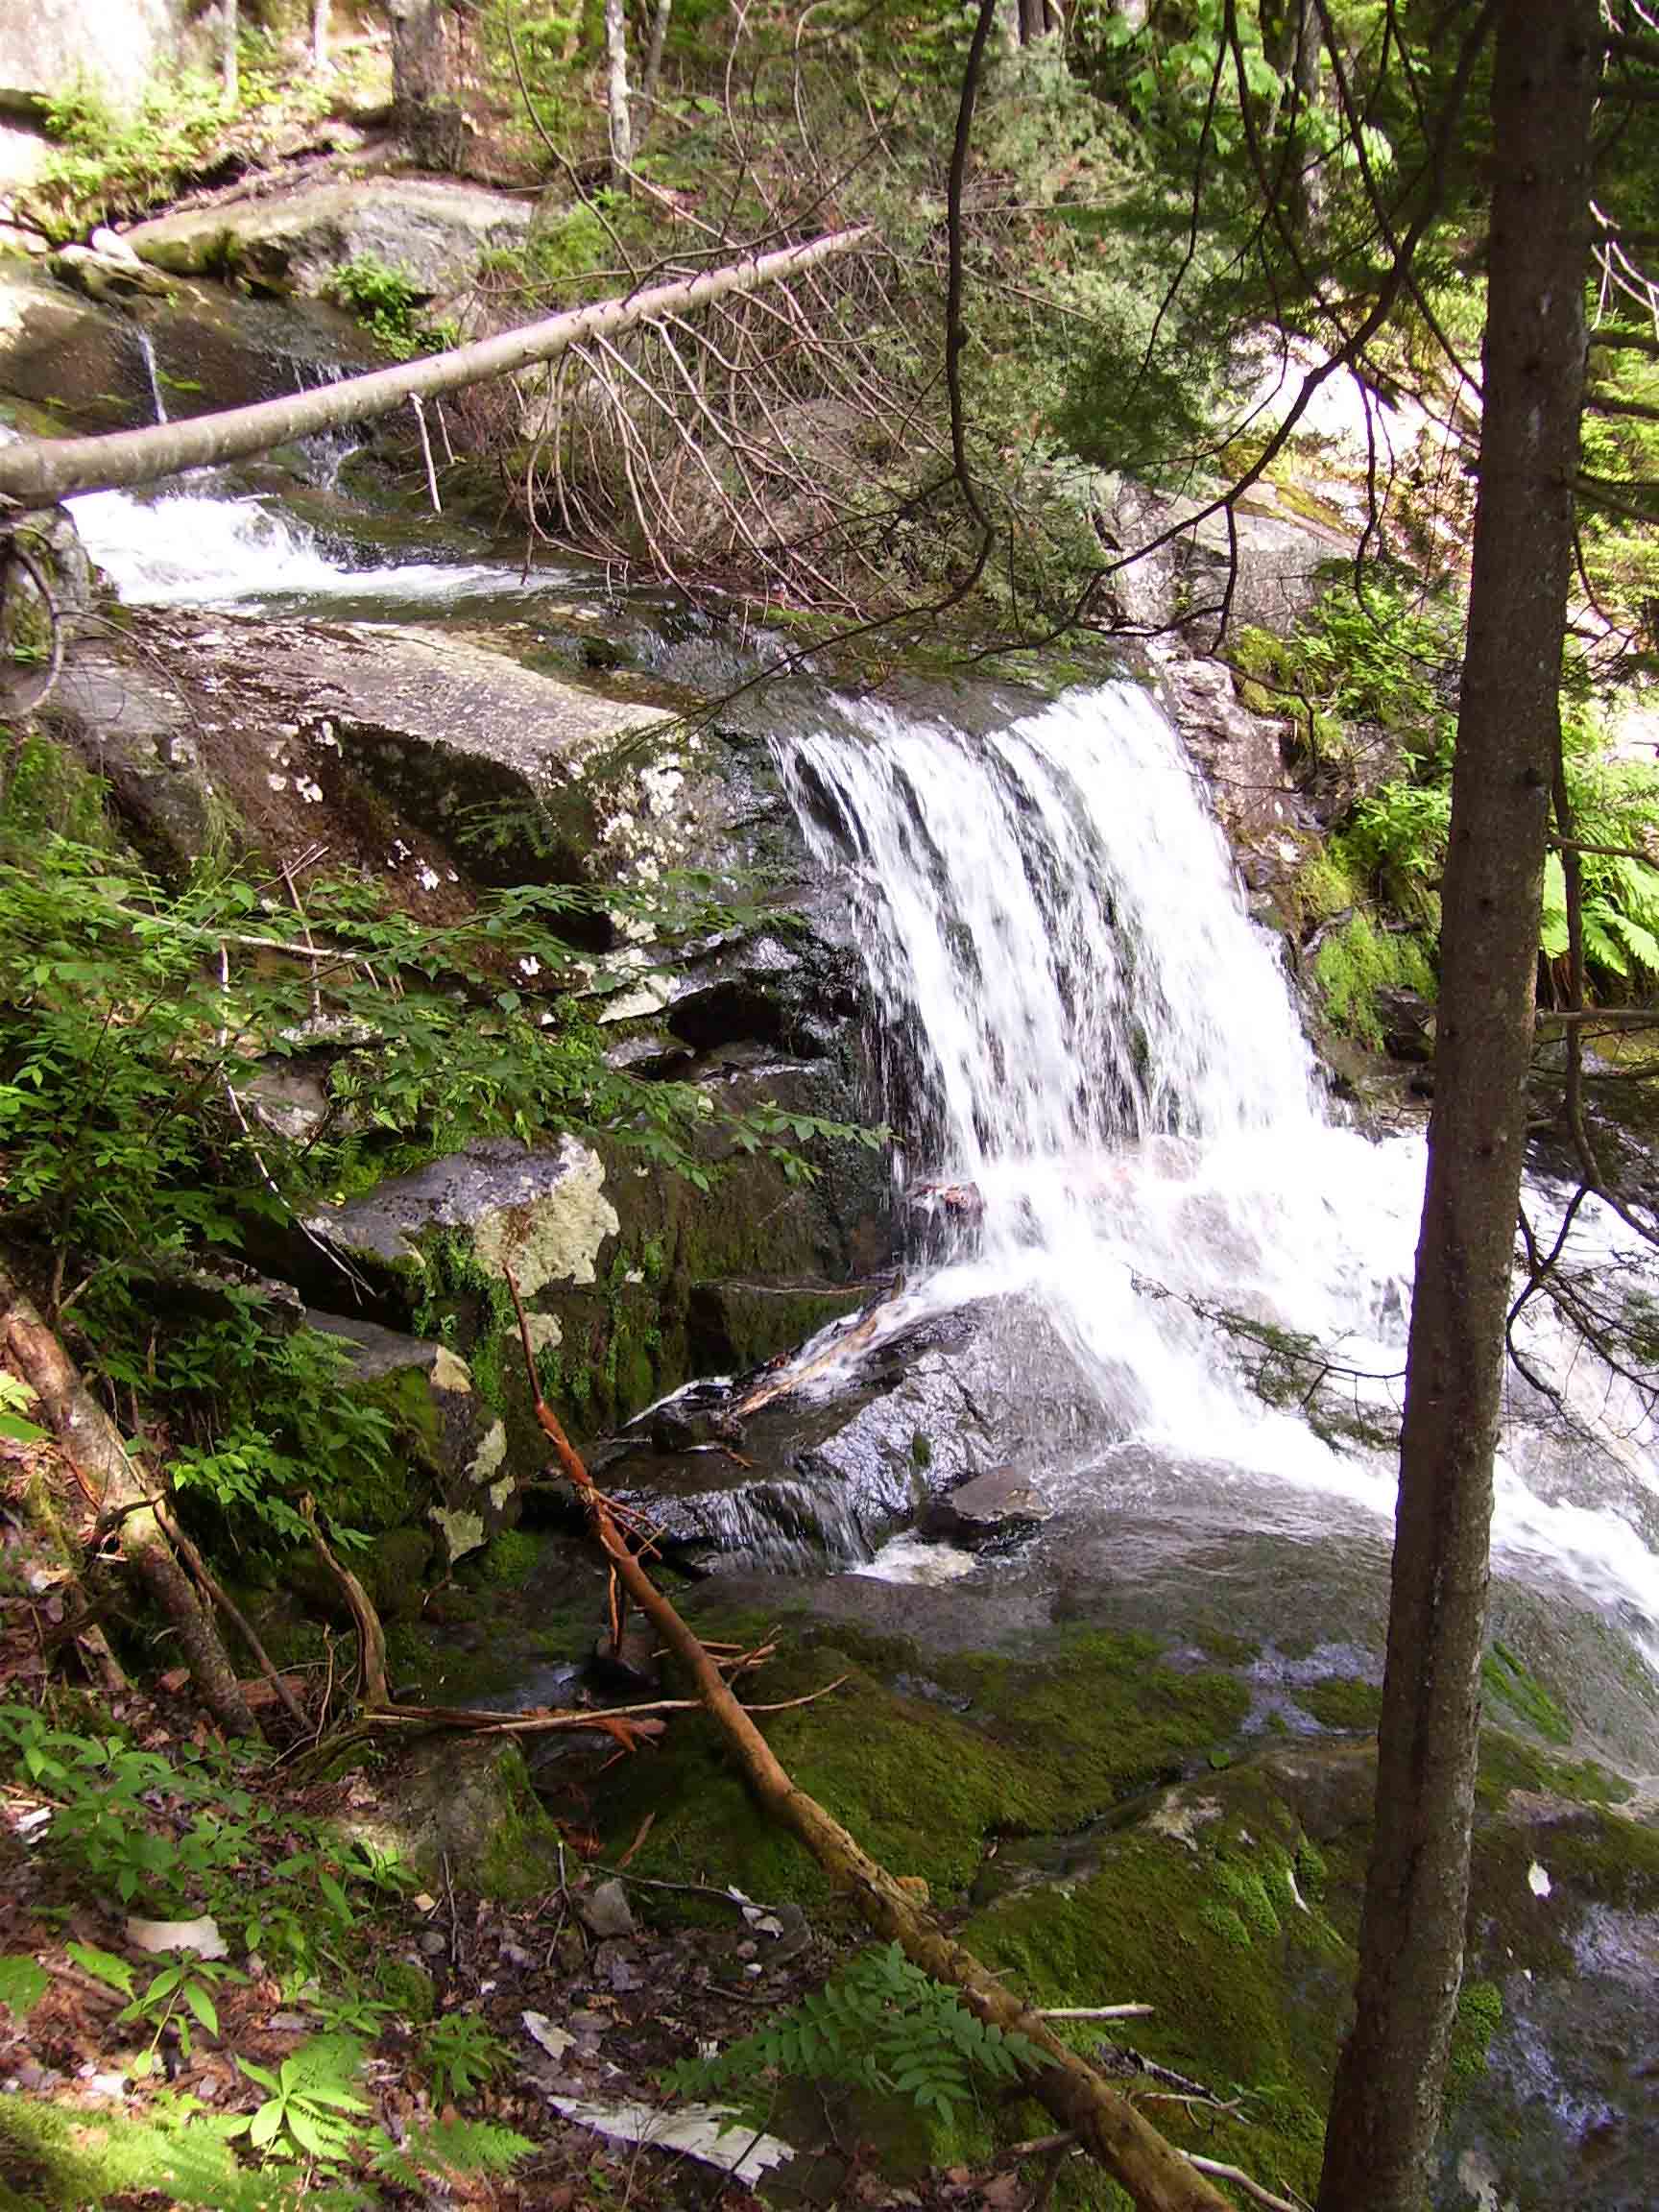 Another of the waterfalls along the Beaver Brook cascades.  Courtesy dlcul@conncoll.edu